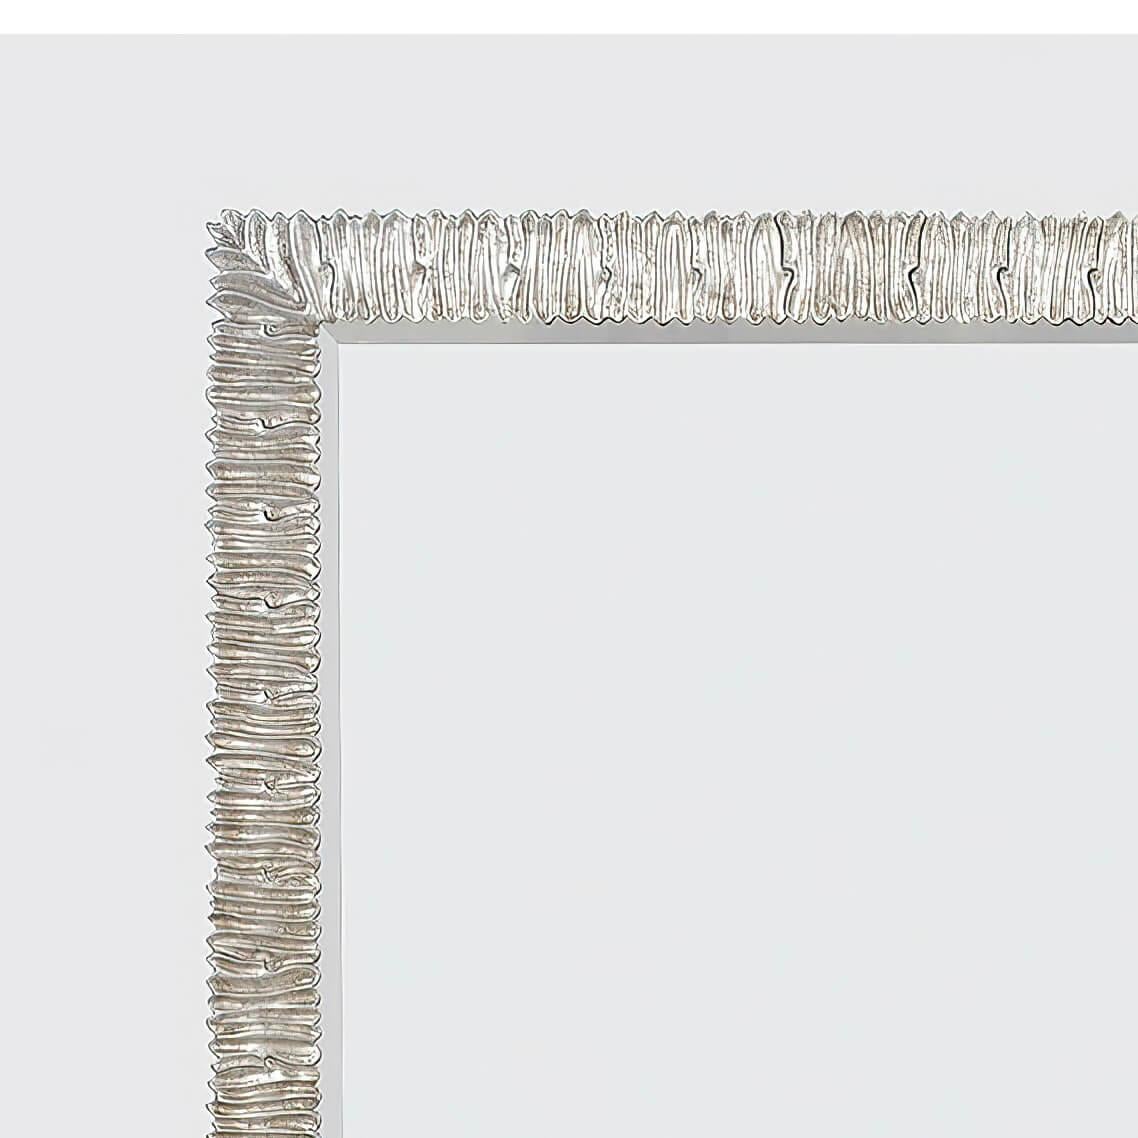 An organic modern silver leaf formed and molded rectangular wall mirror. This mirror can be hung horizontally or vertically. The silver leaf finish is applied to an aluminum cast frame.

Dimensions: 38